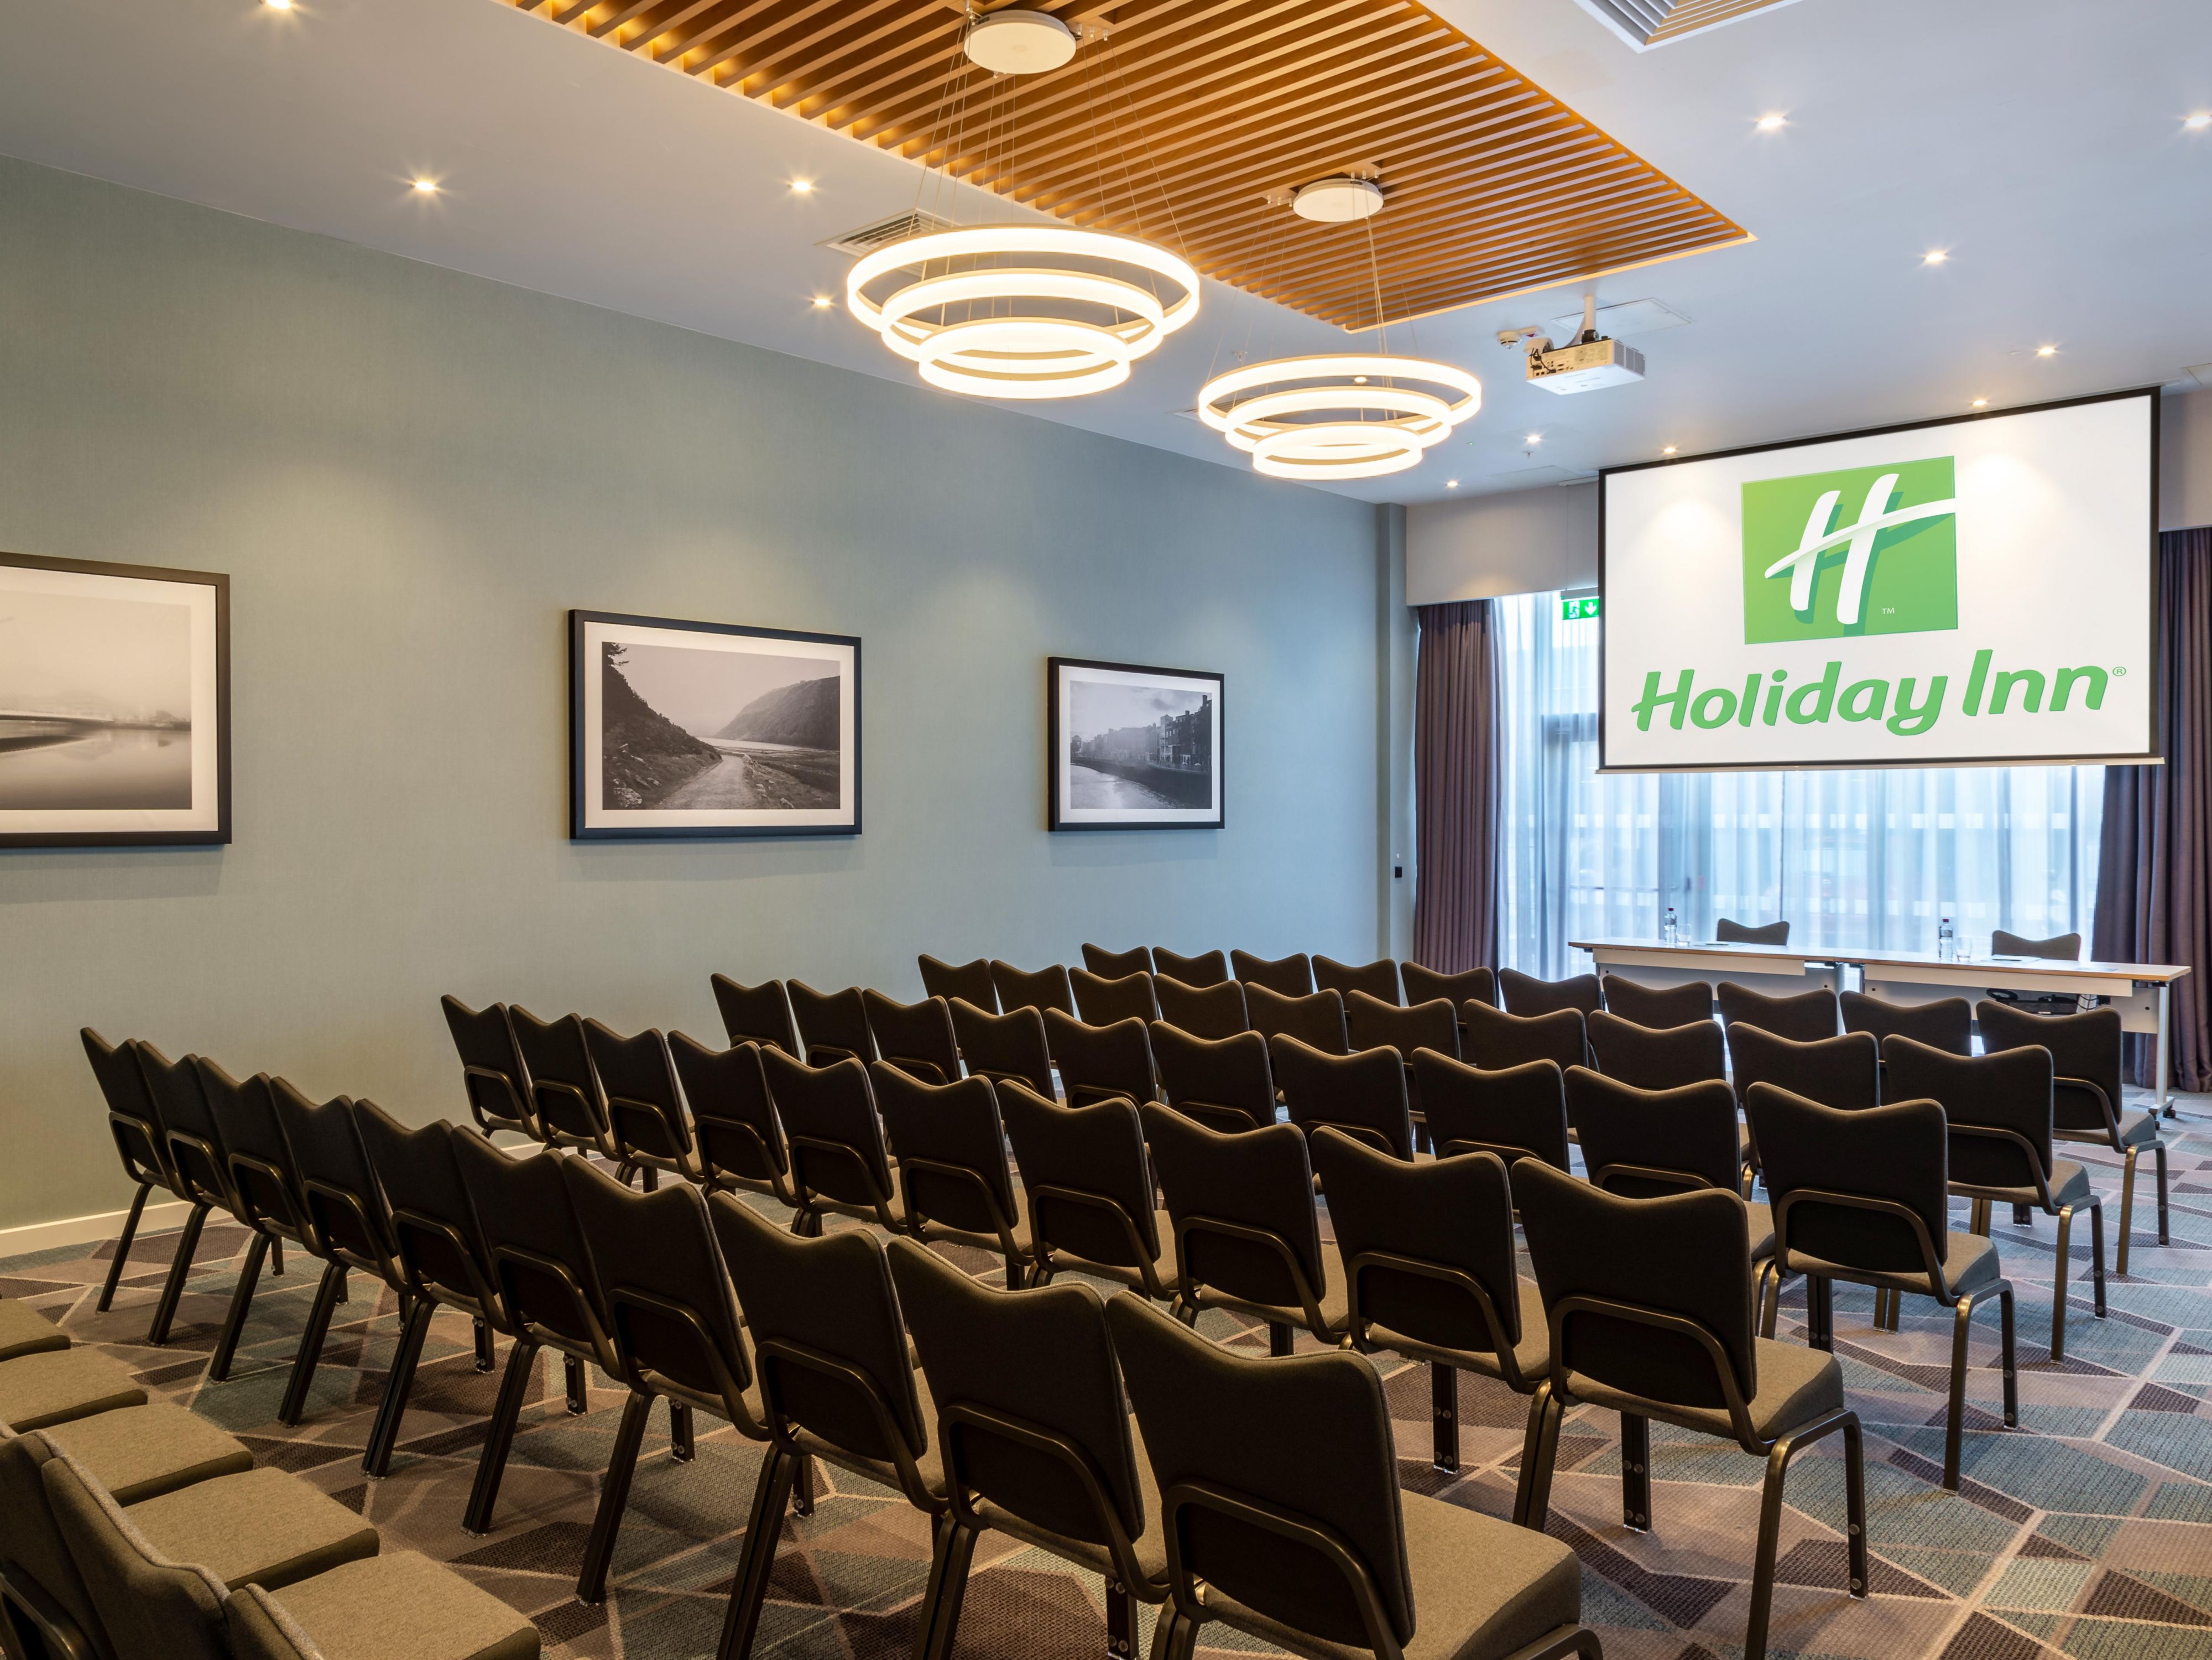 The meeting rooms may accommodate up to 120 delegates with all the latest technology including state-of-the-art AV equipment and electronic touch control equipment. With natural daylight, air conditioning and black out blinds, there is also a secure entrance accessible via the hotel lobby, with a private reception area.